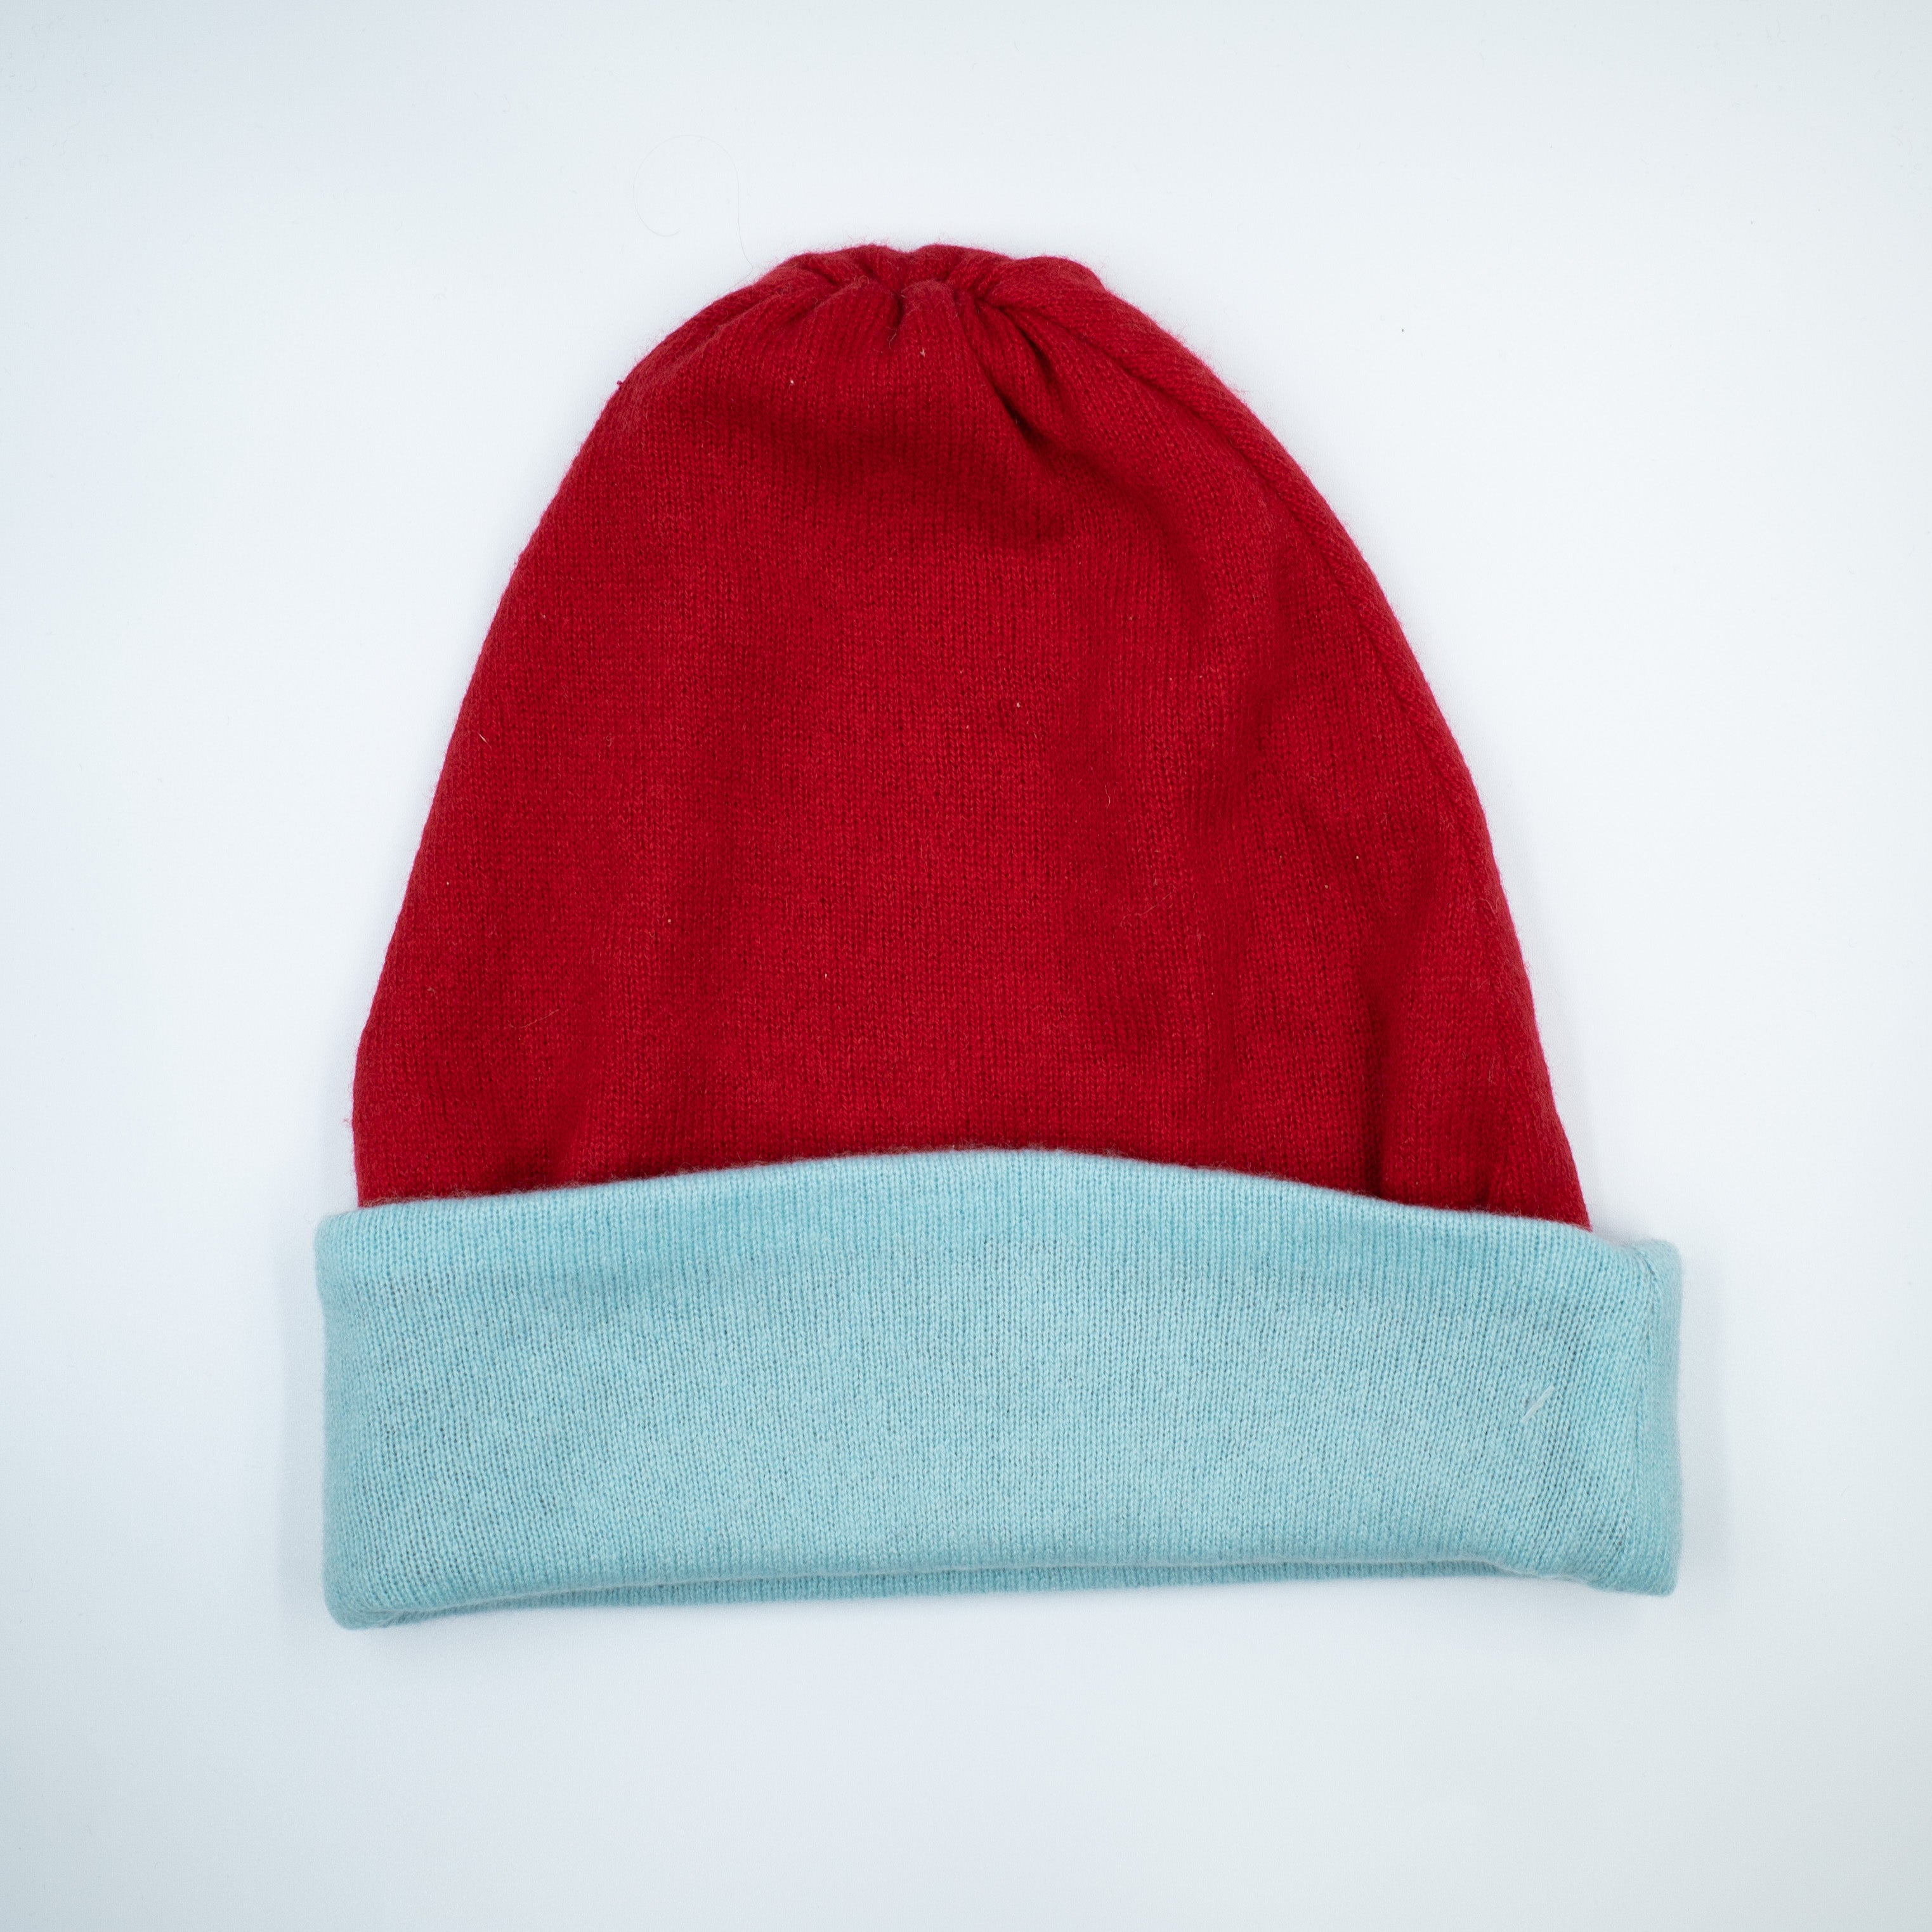 Red and Pale Blue Reversible Slouchy Beanie Hat